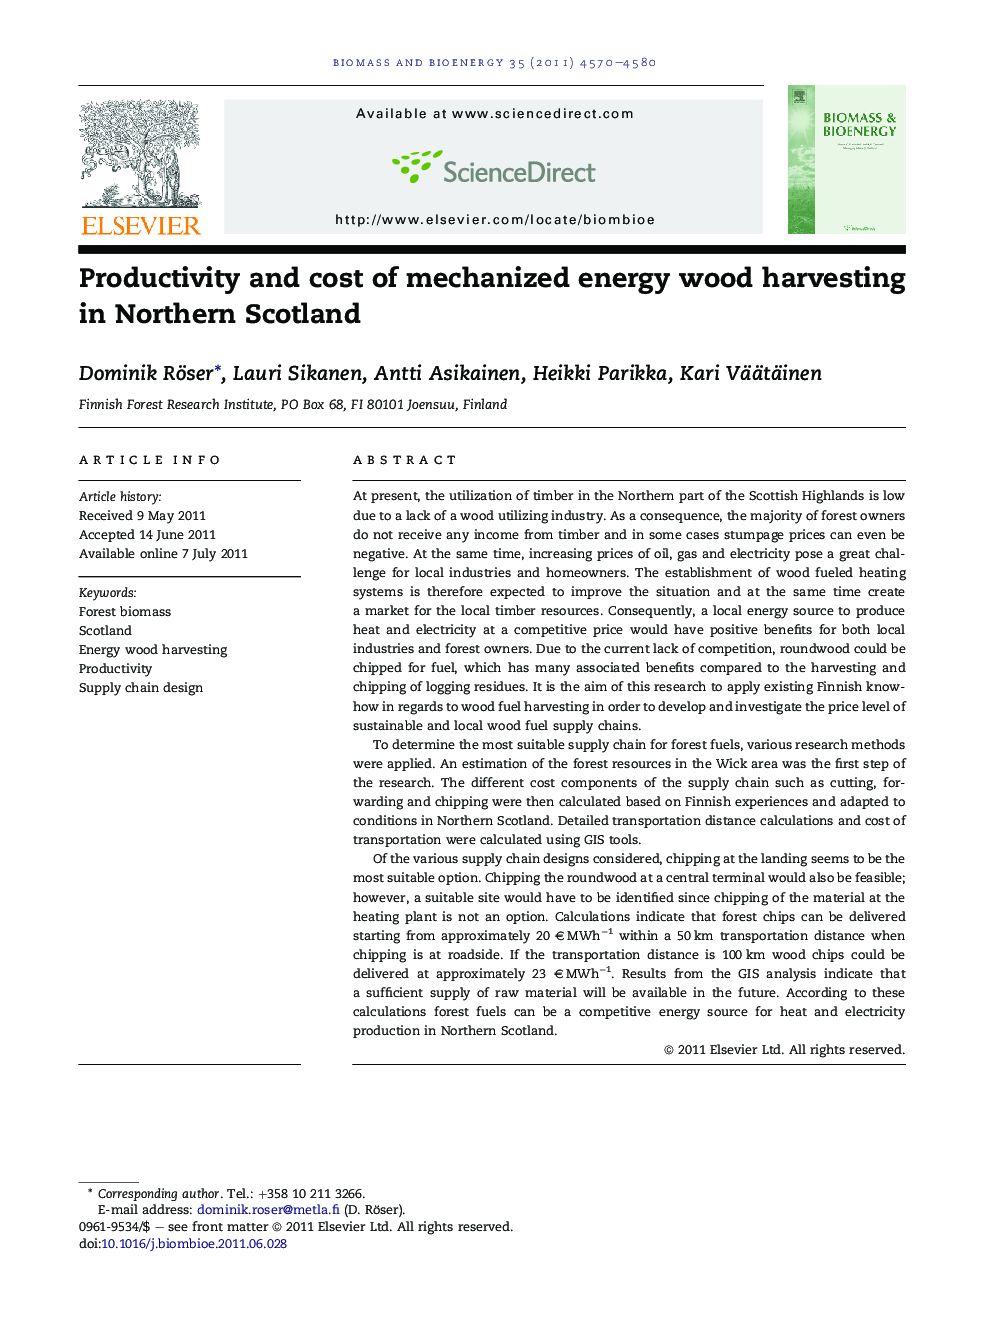 Productivity and cost of mechanized energy wood harvesting in Northern Scotland